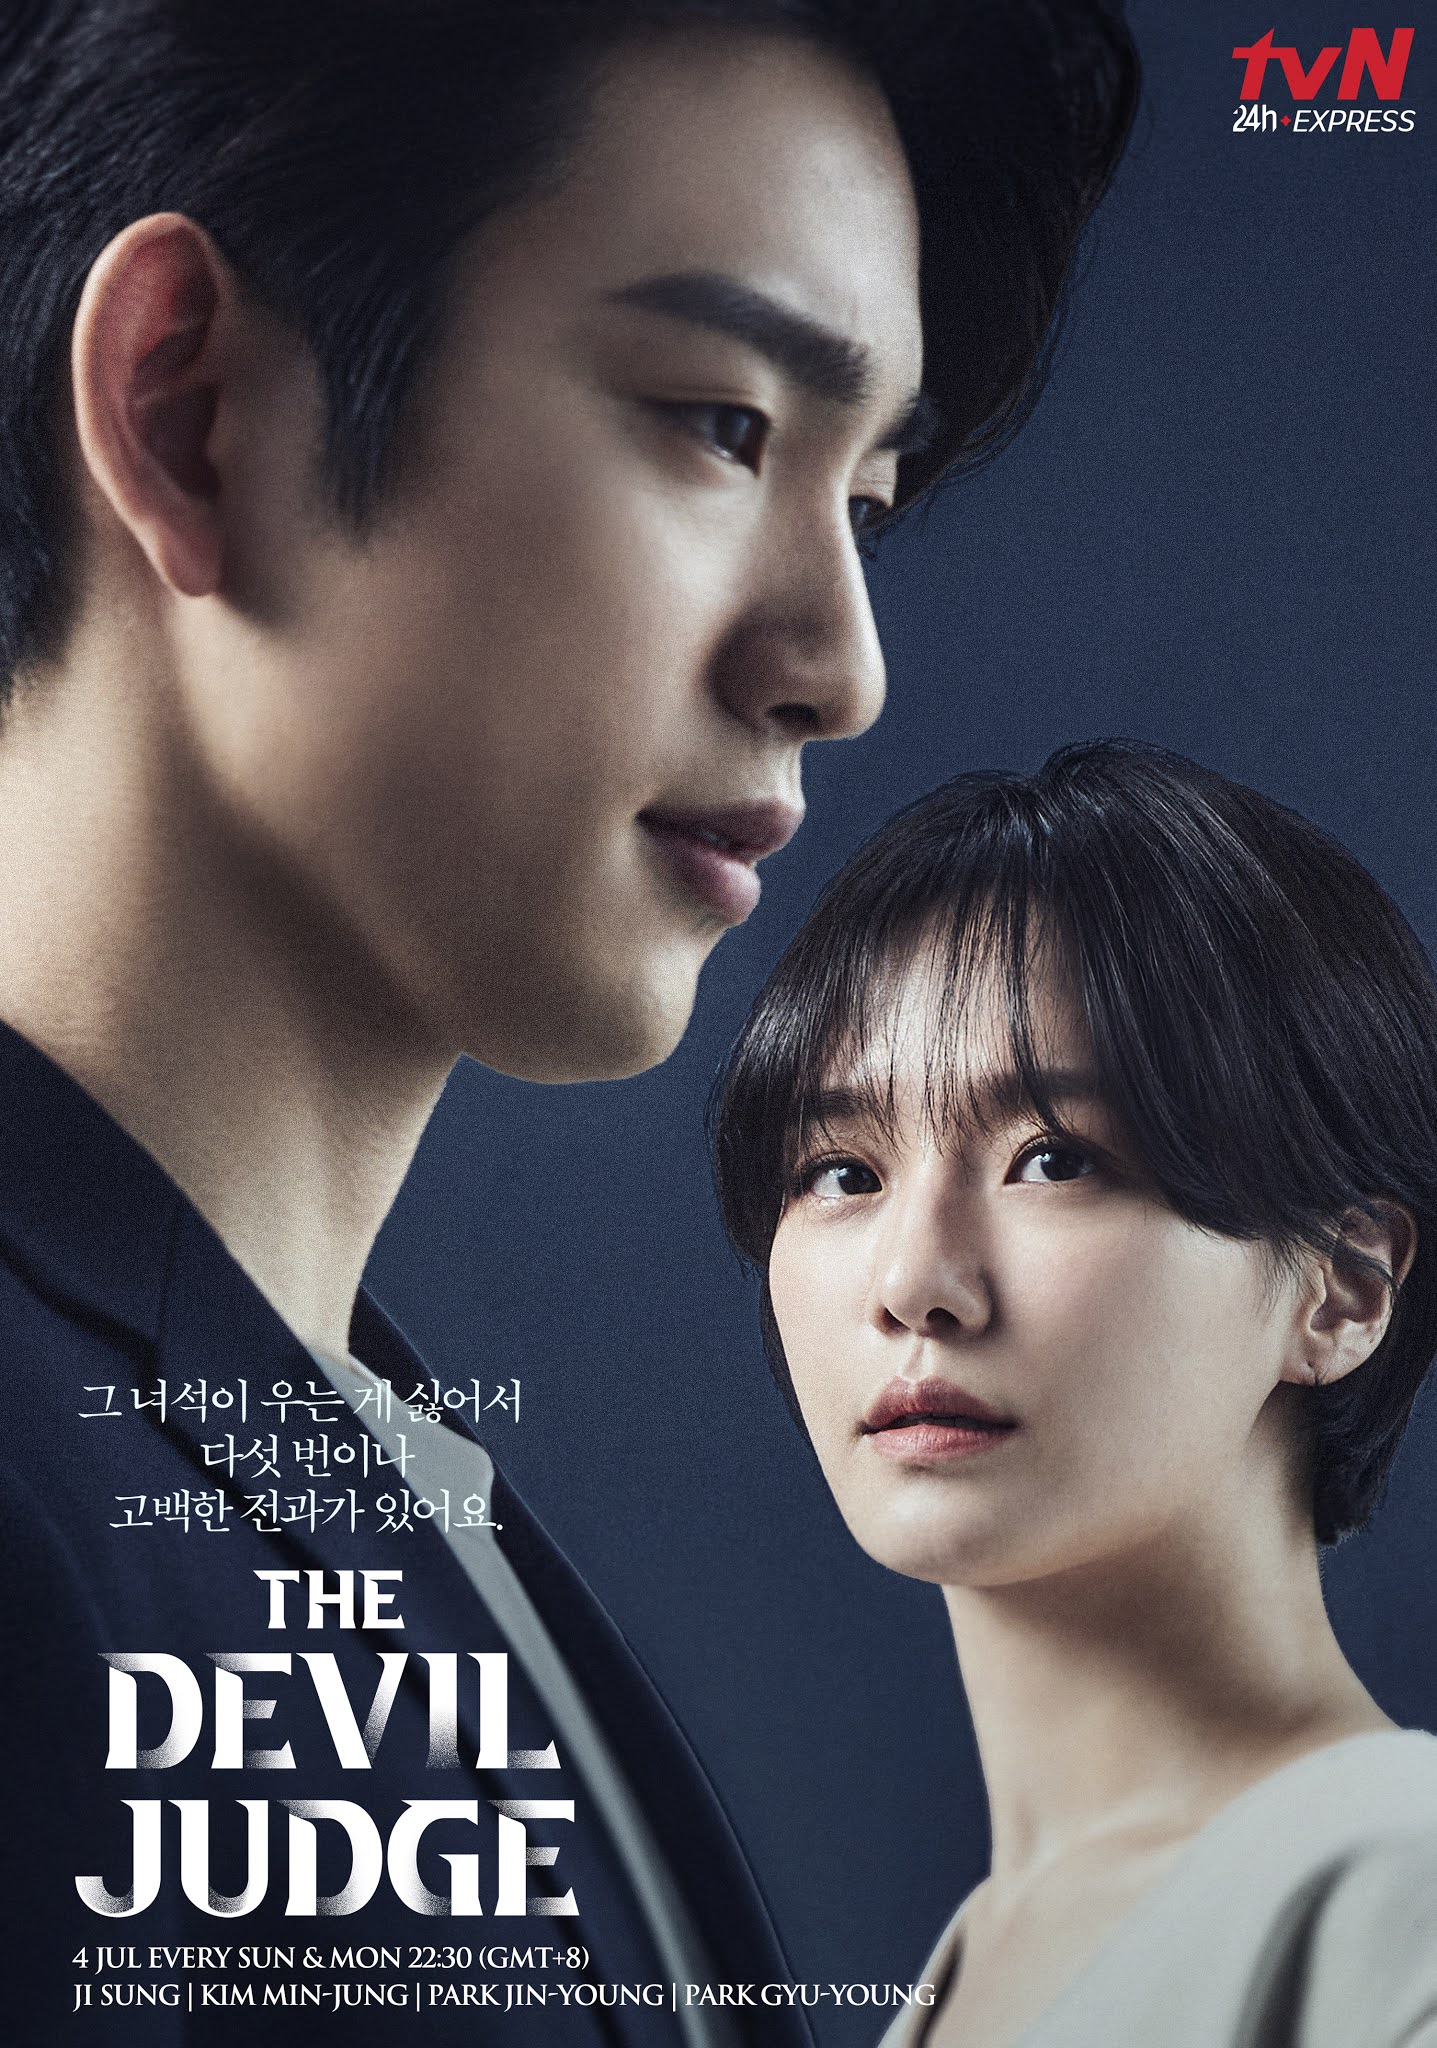 The characters of the Korean Drama The Devil Judge